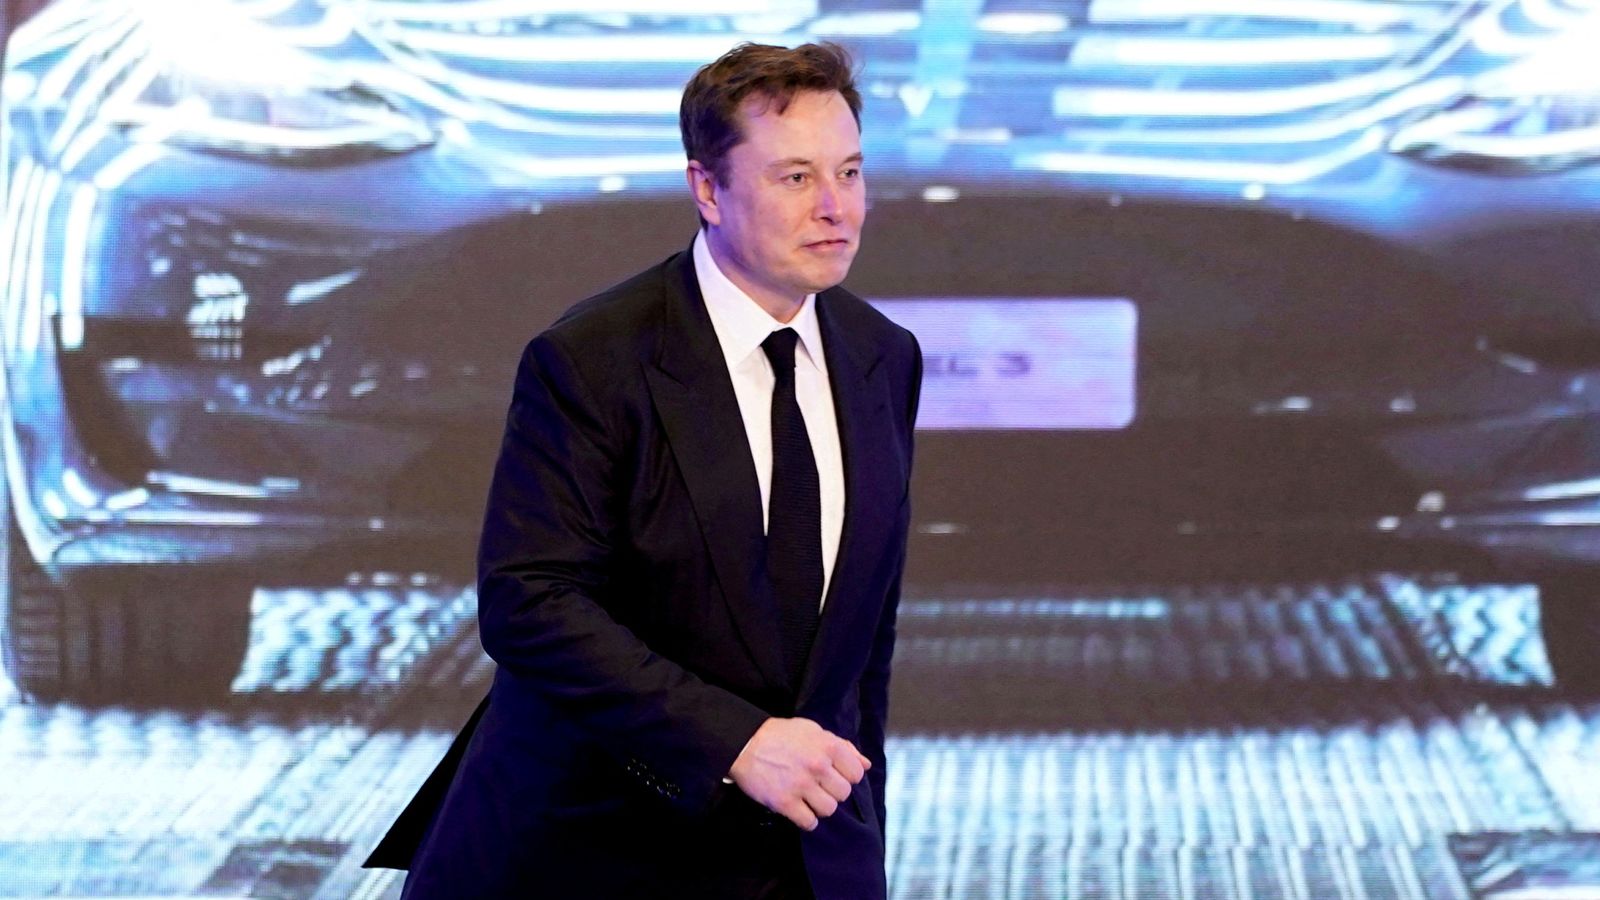 Elon Musk: Tesla and SpaceX founder cleared of deceiving investors with 2018 tweet